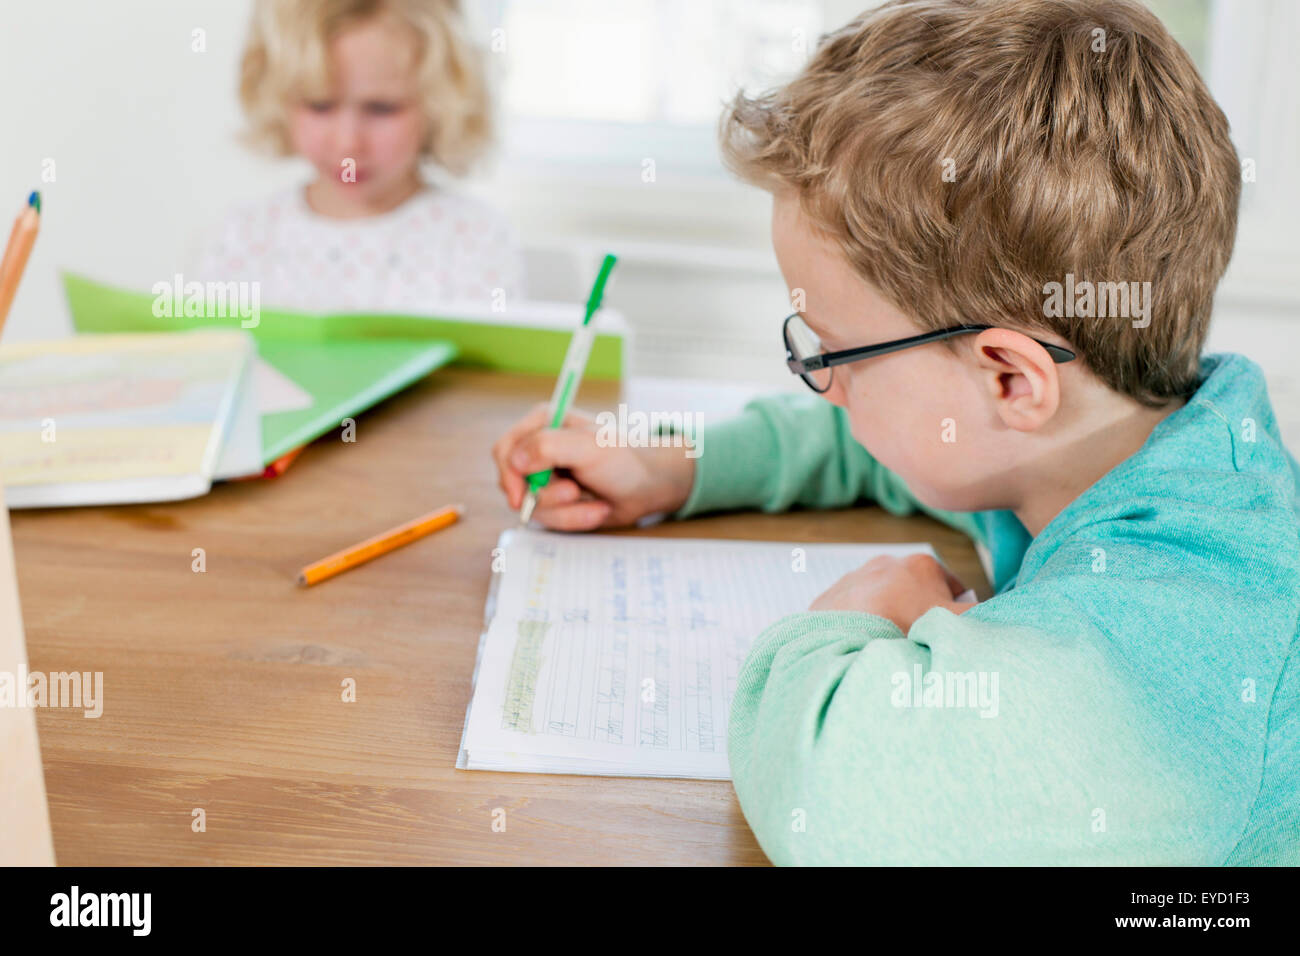 Boy and girl writing and reading Stock Photo